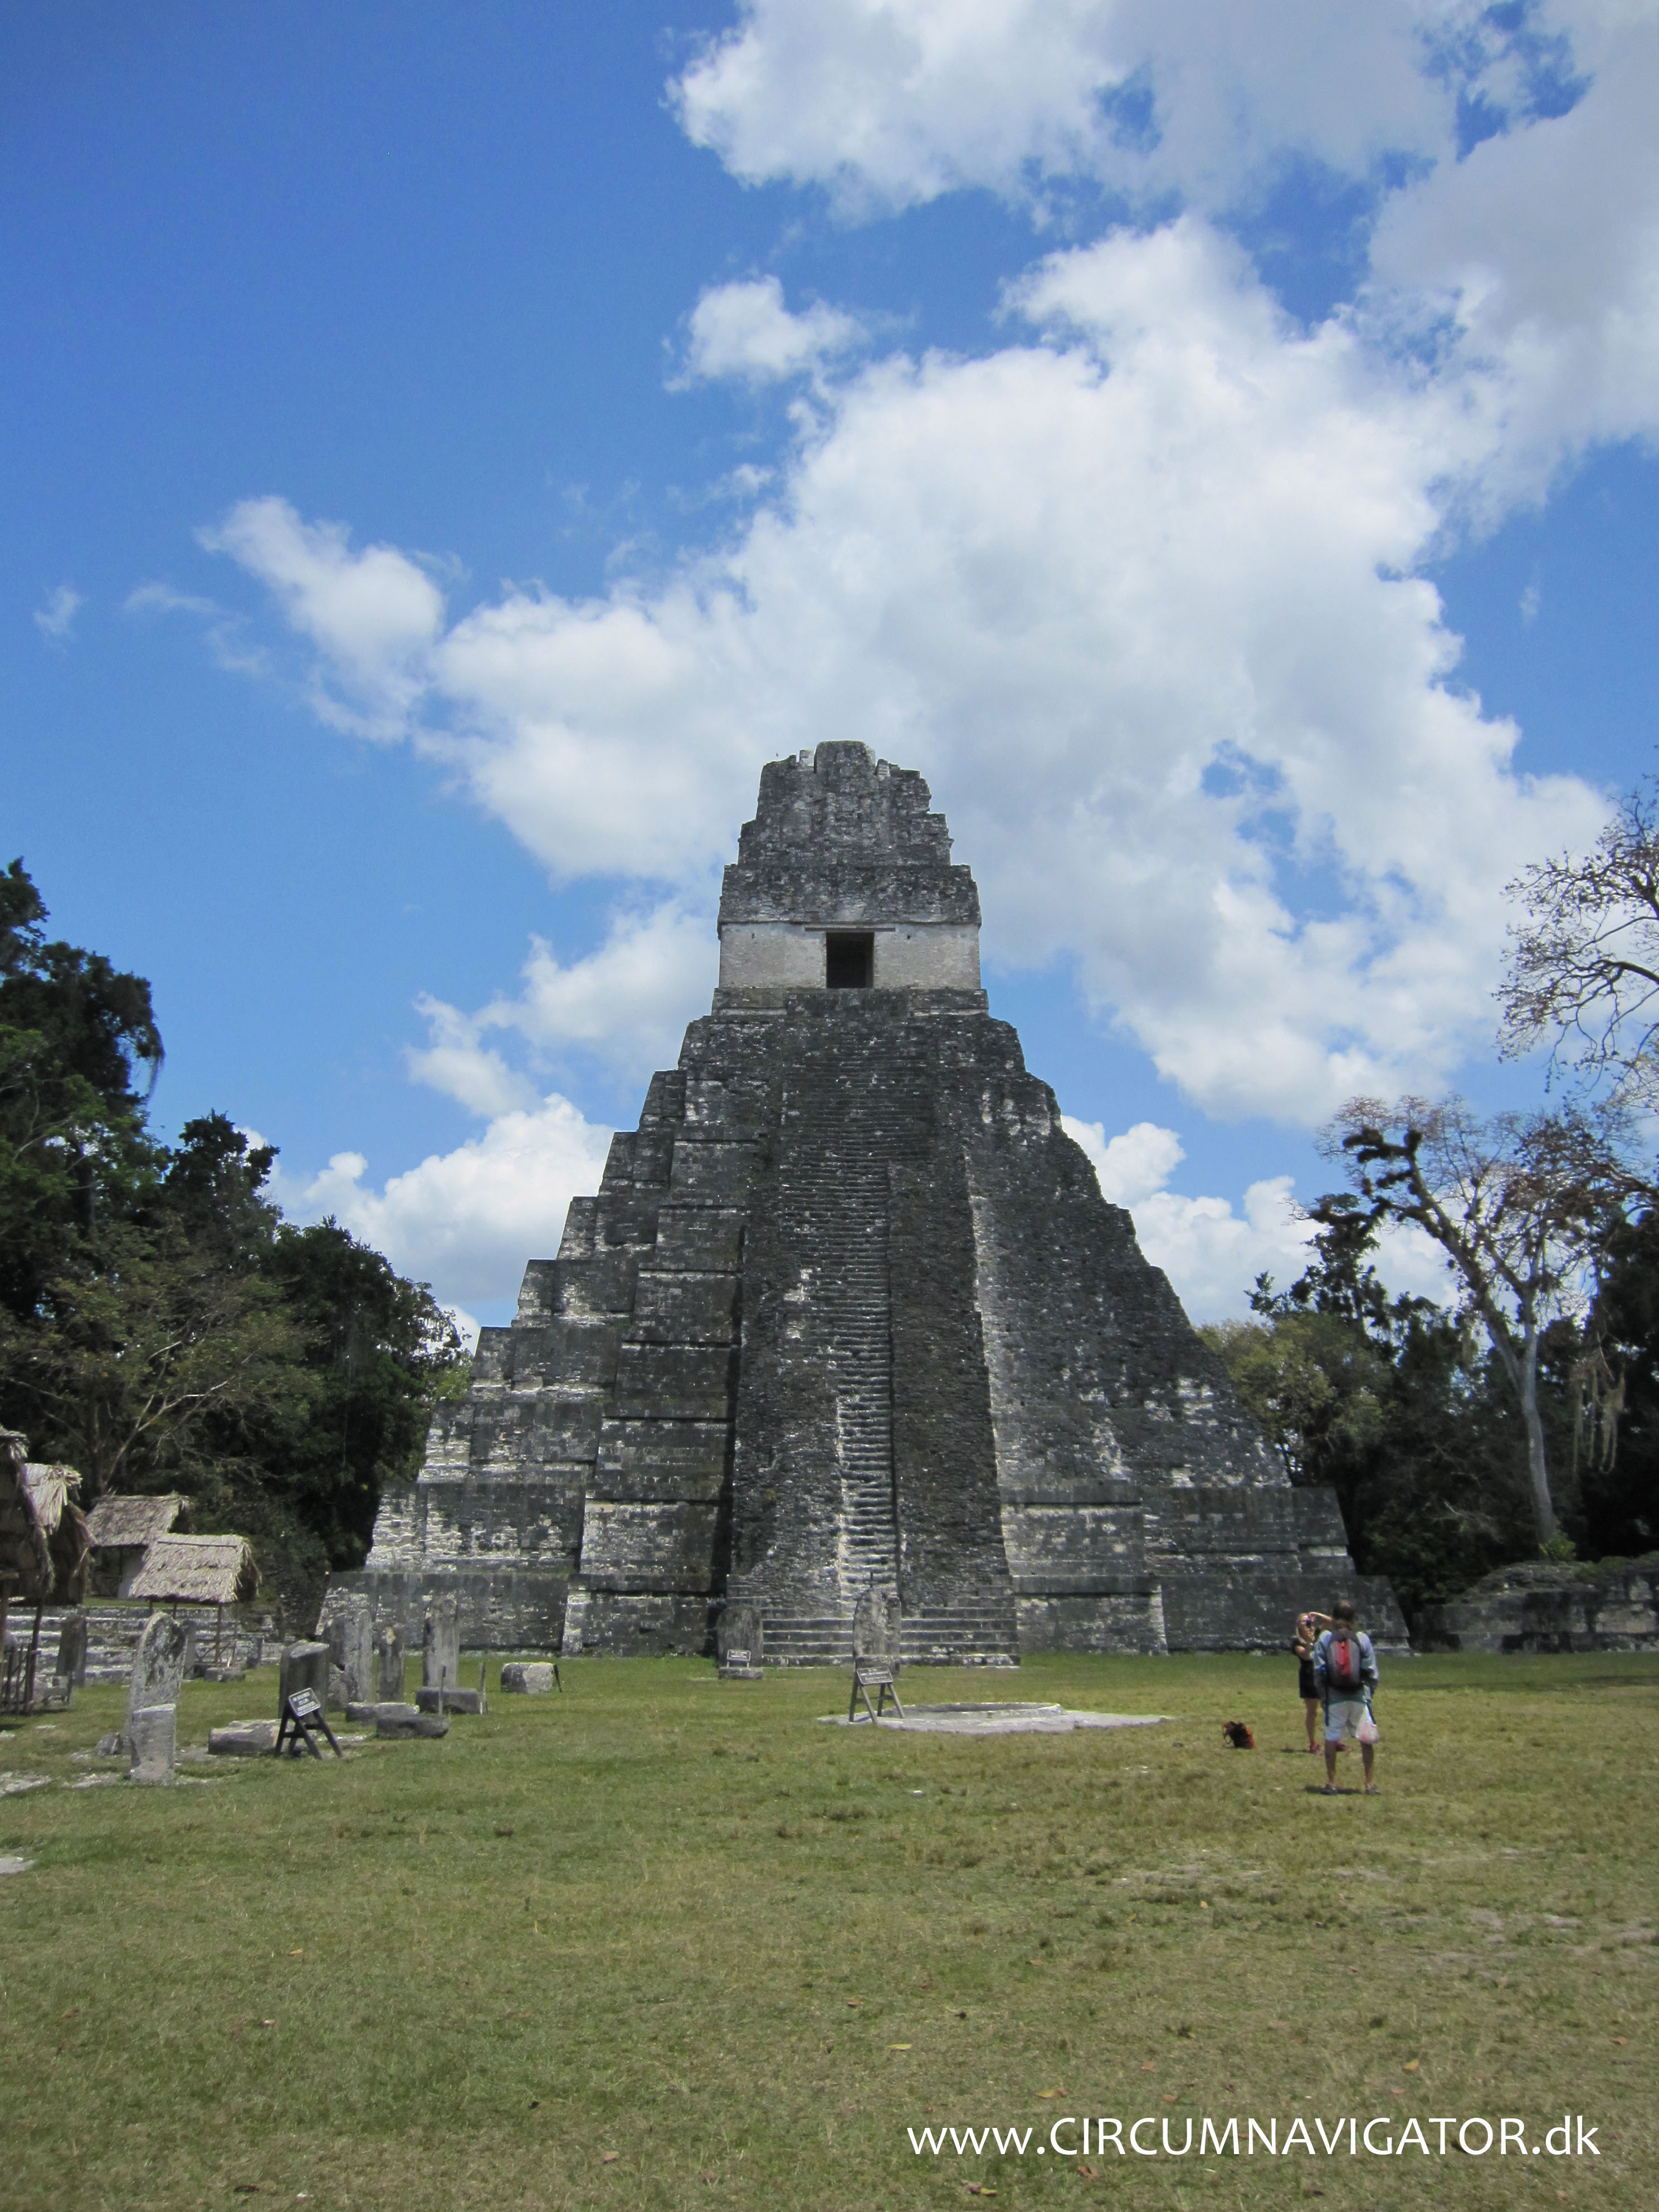 The Mayan myth – Is it the end of the World?